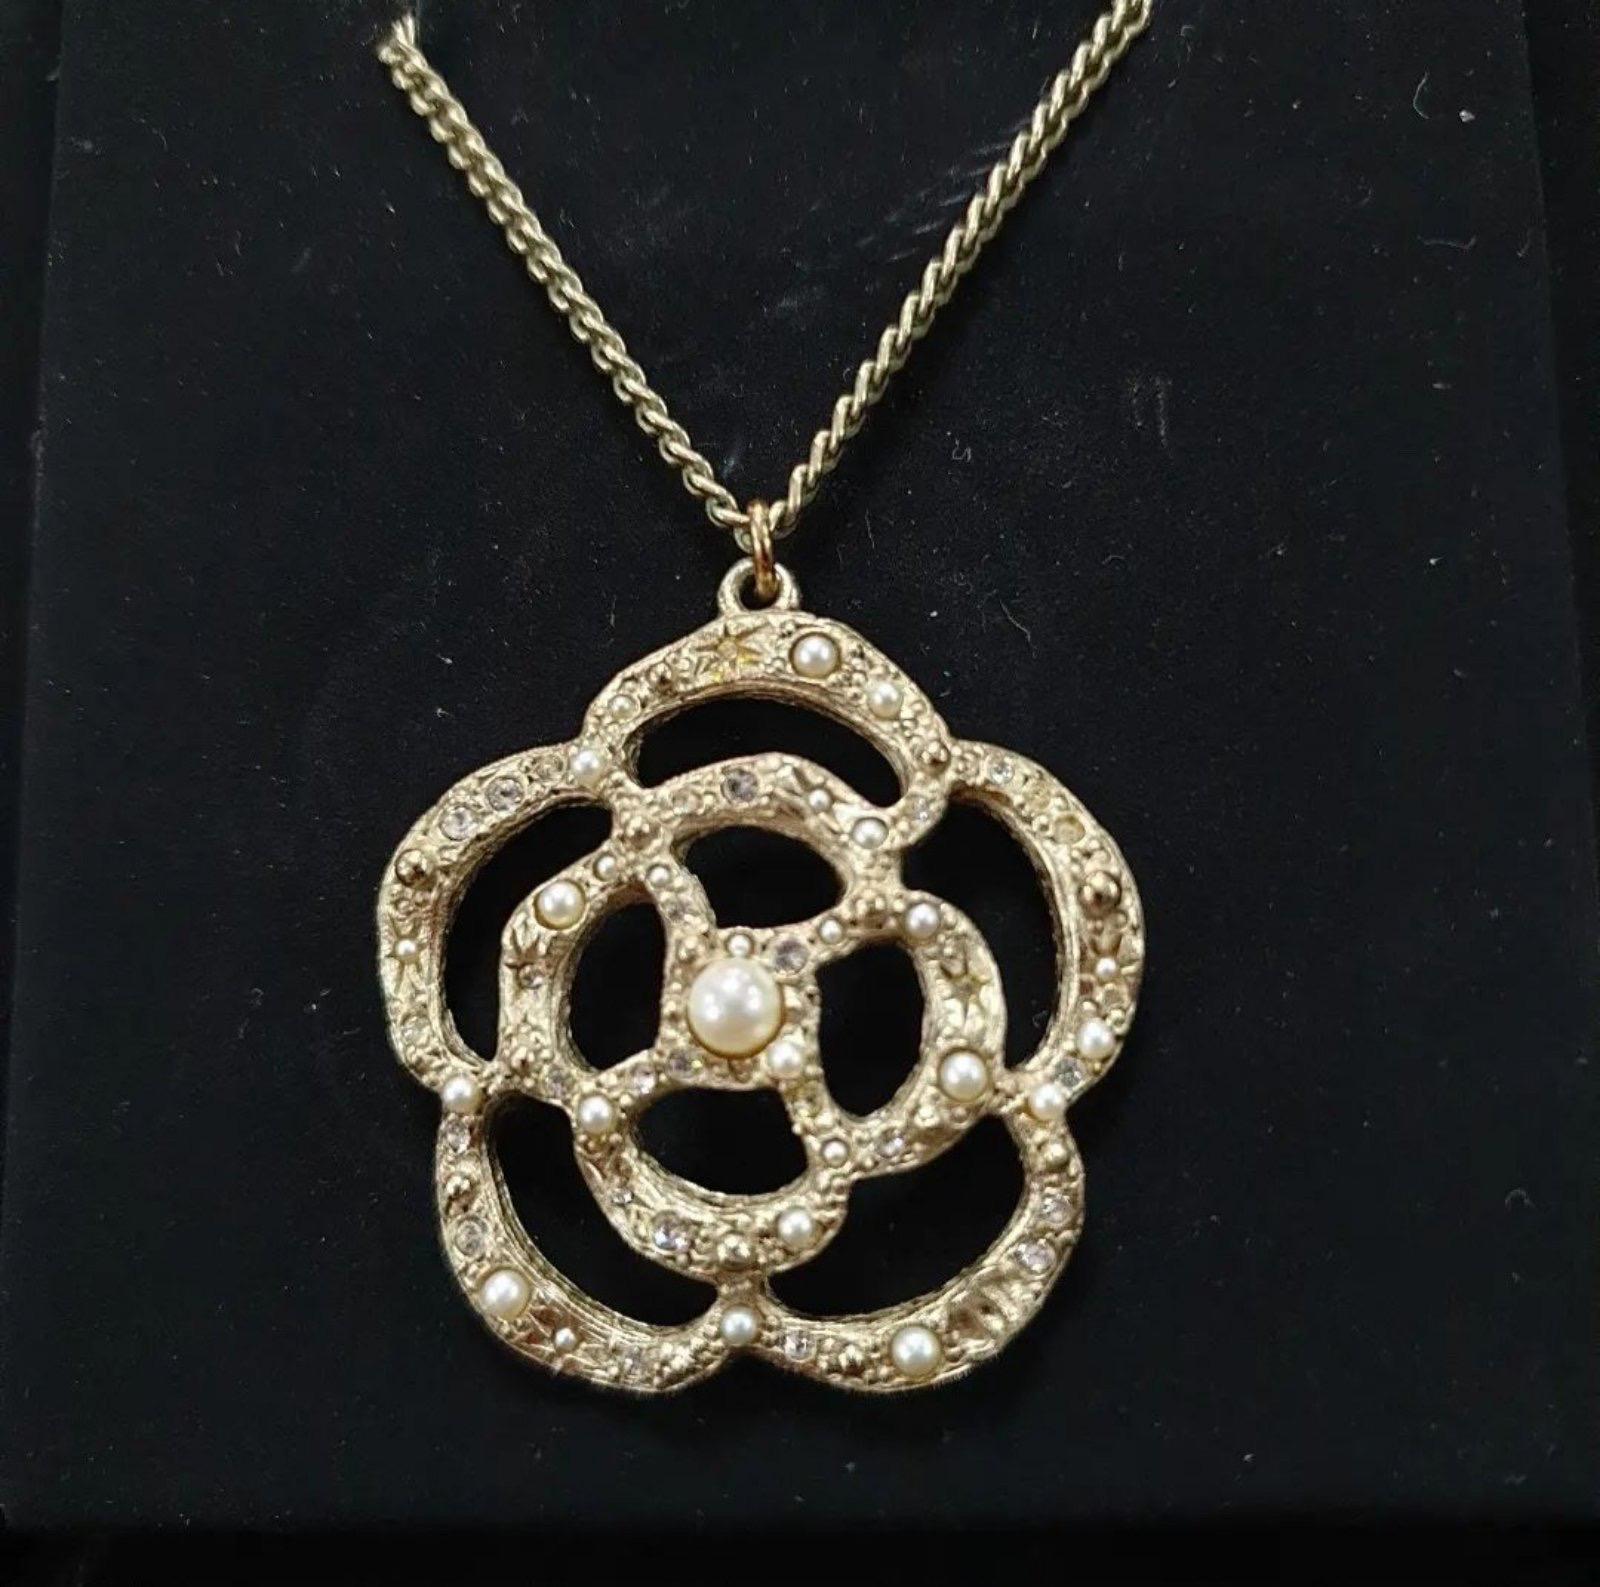  Gorgeous Chanel Gold Metal and Faux Pearl Camellia Pendant Necklace.
 It features goldtone metal in the Camellia flower design and faux pearls set on a lovely goldtone snake chain. 
Very good condition.
Comes with a case.